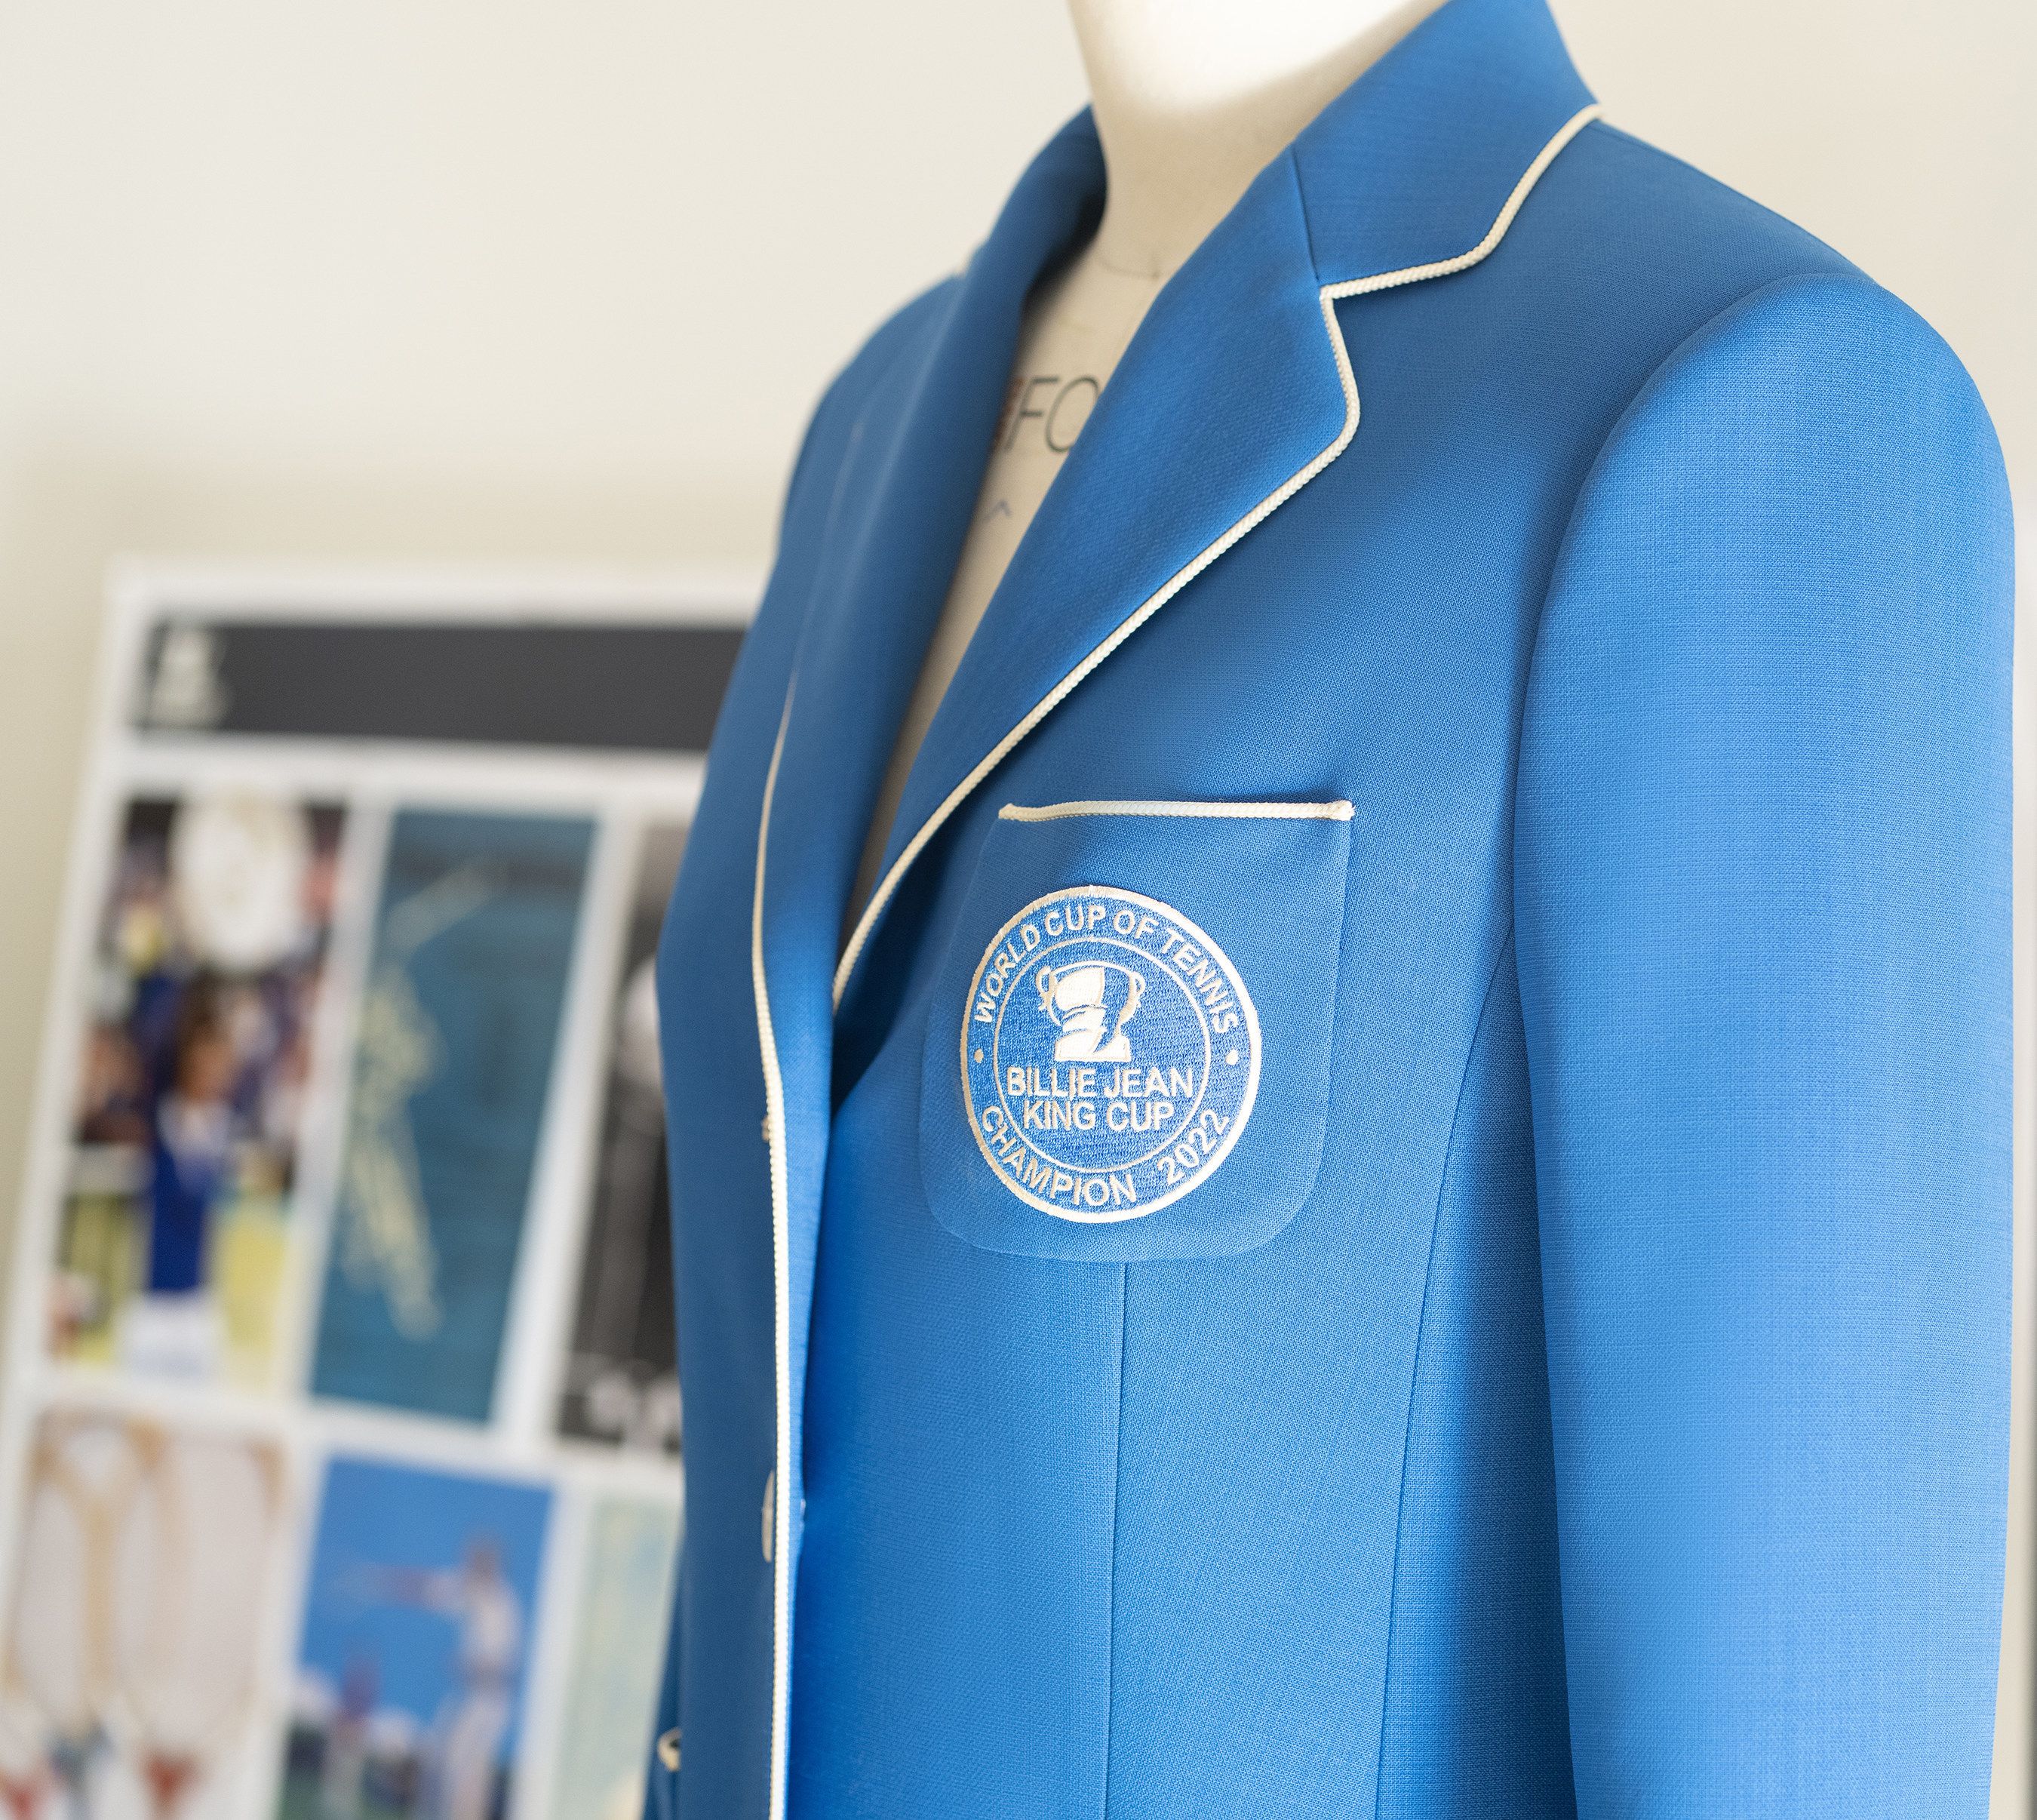 Tory Burch Collaborated with Tennis Legend Billie Jean King